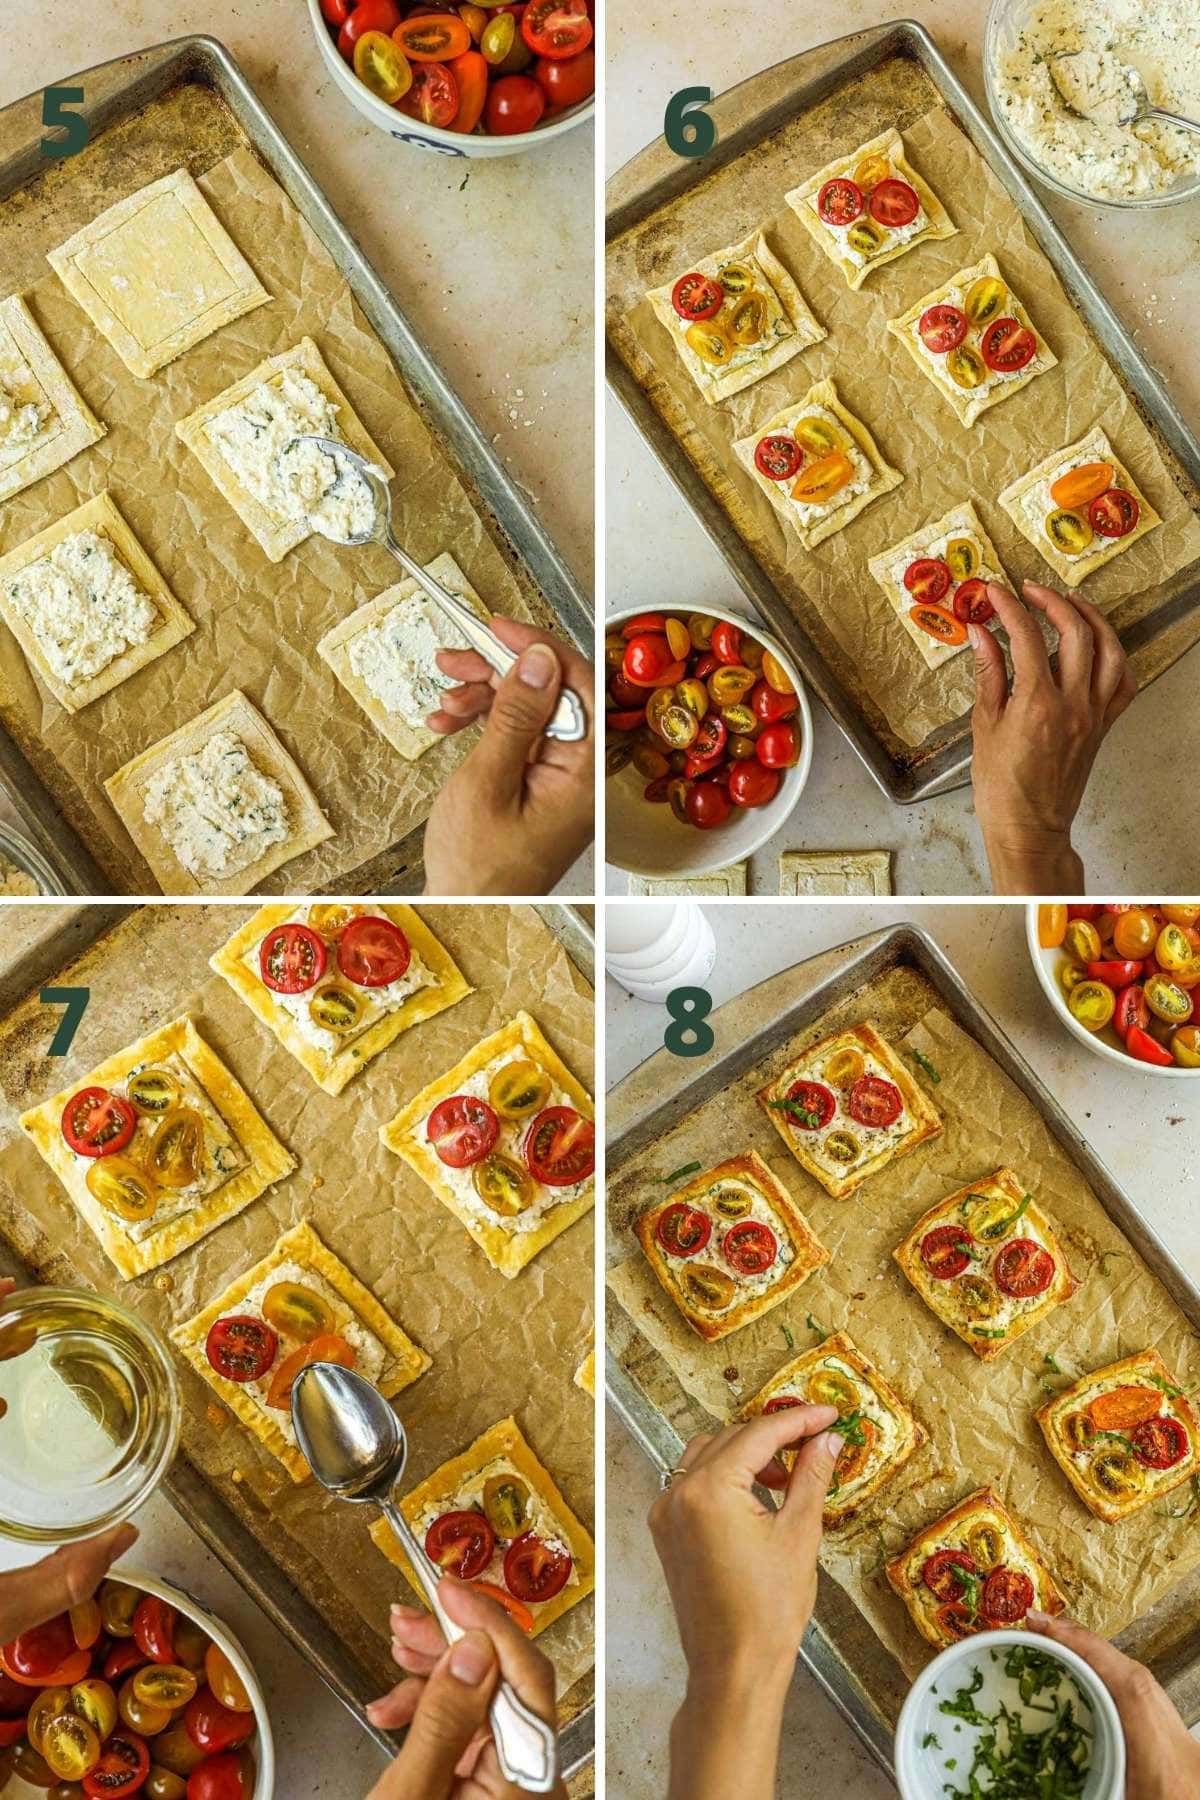 Steps to make tomato tartlets with puff pastry, including adding the ricotta mixture, topping with cheese and olive oil, and baking in the oven.